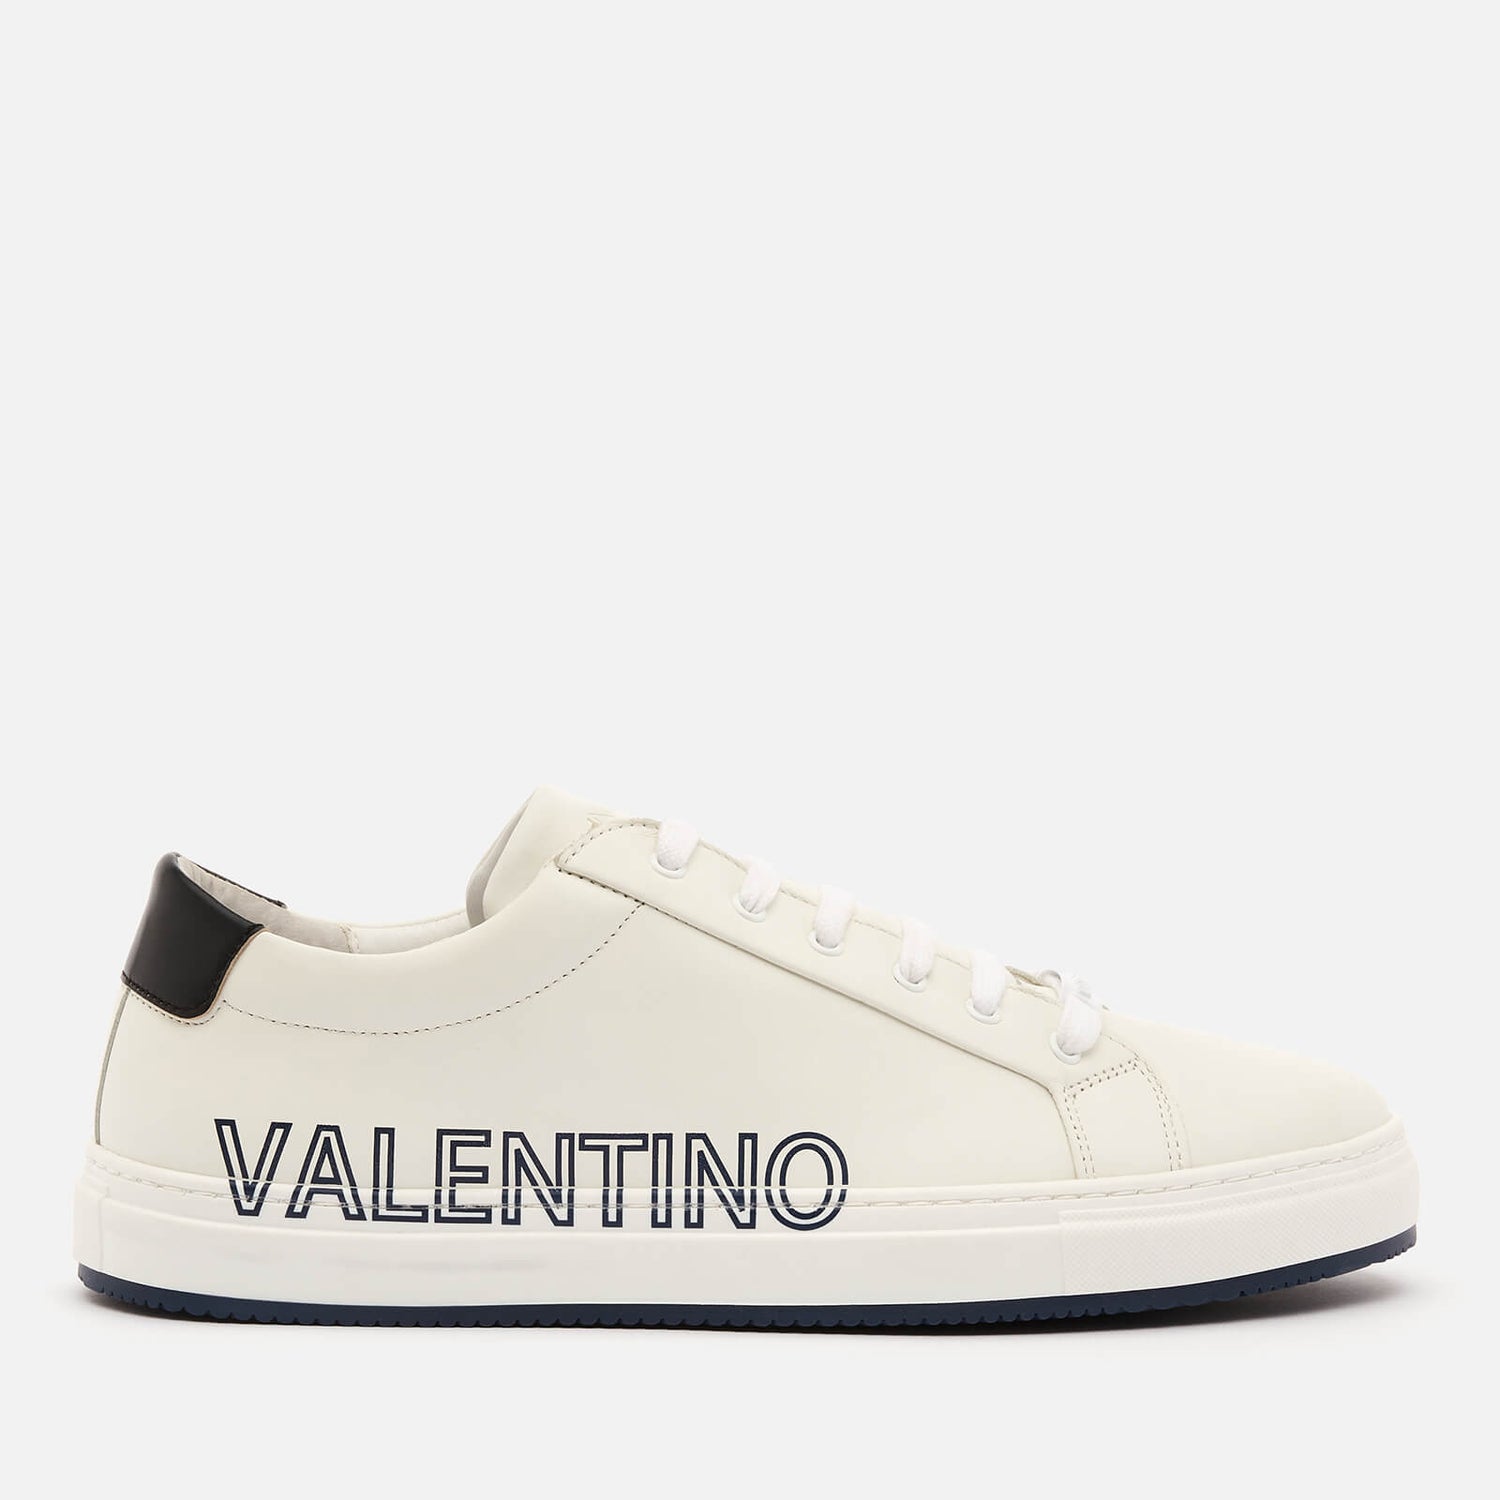 Valentino Men's Leather Low Top Trainers - White/Blue